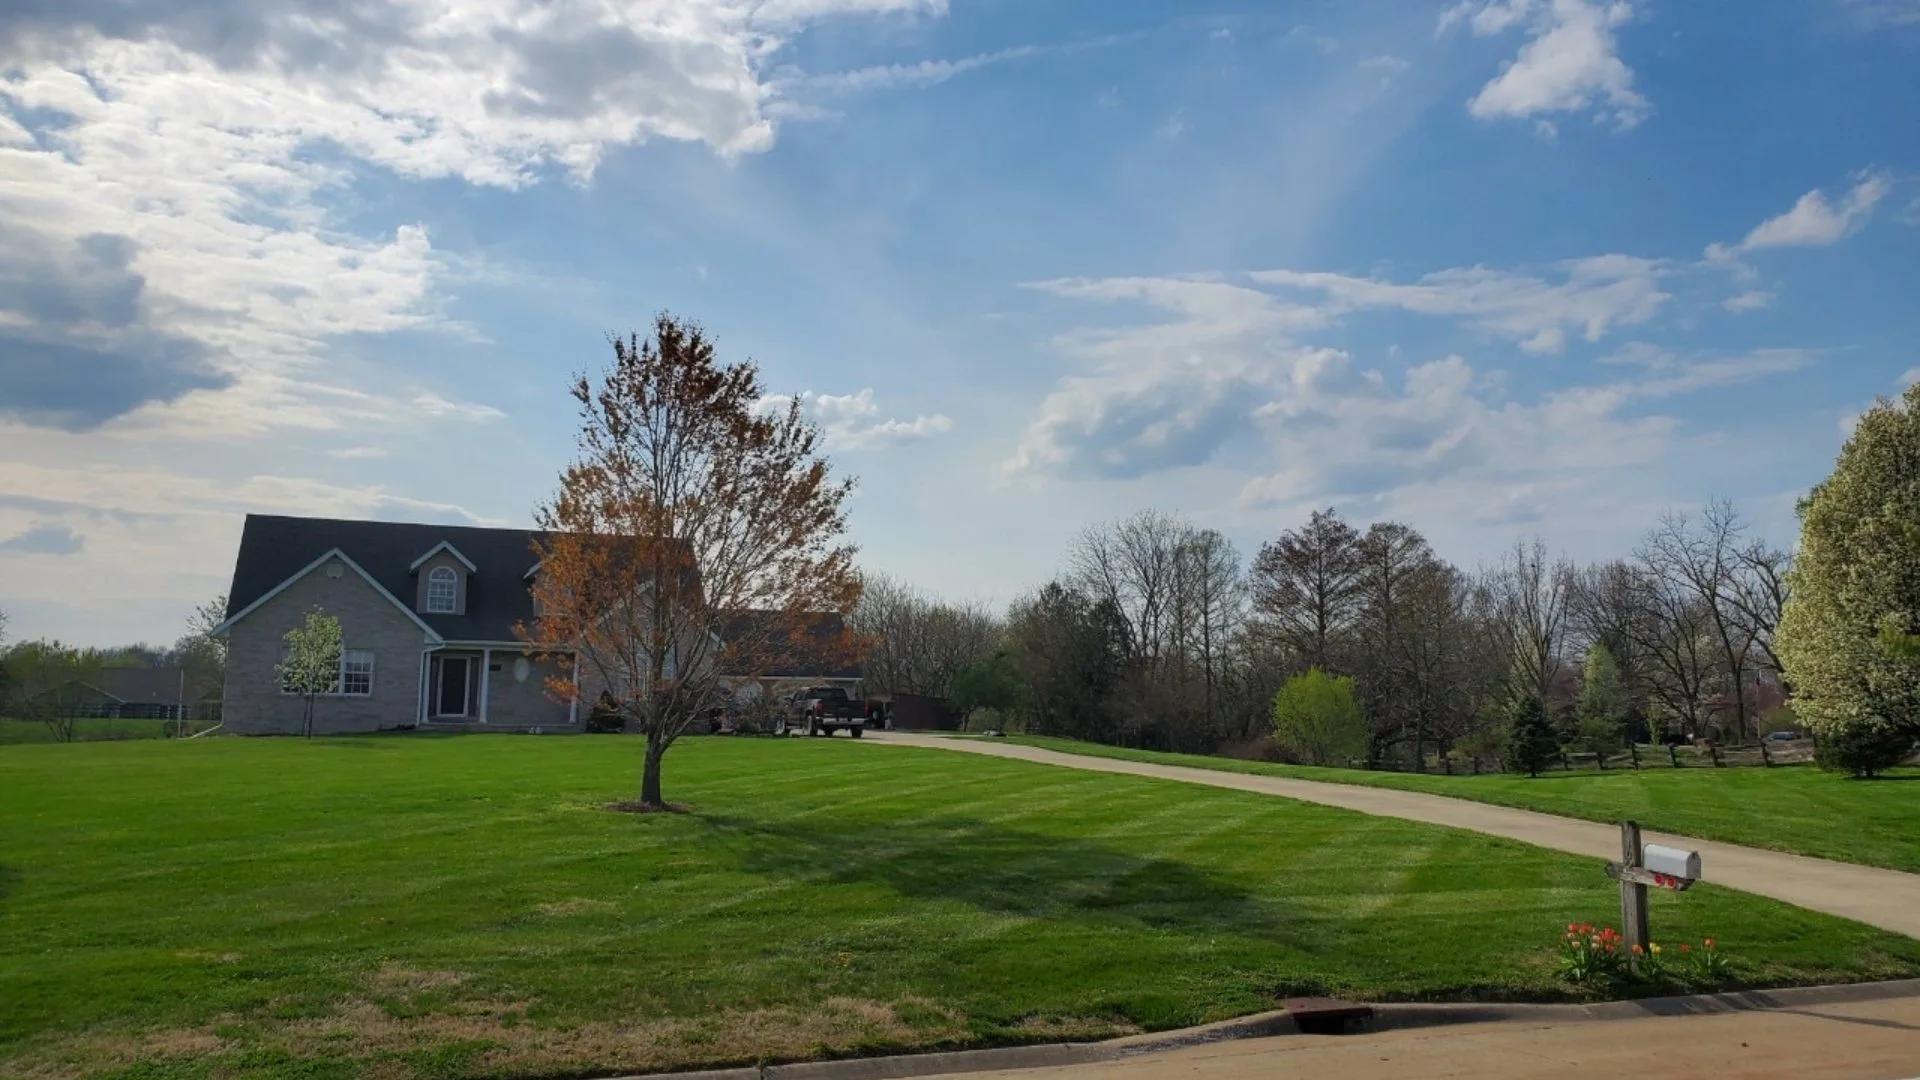 Lawn care services done on a home in South Roxana, IL.